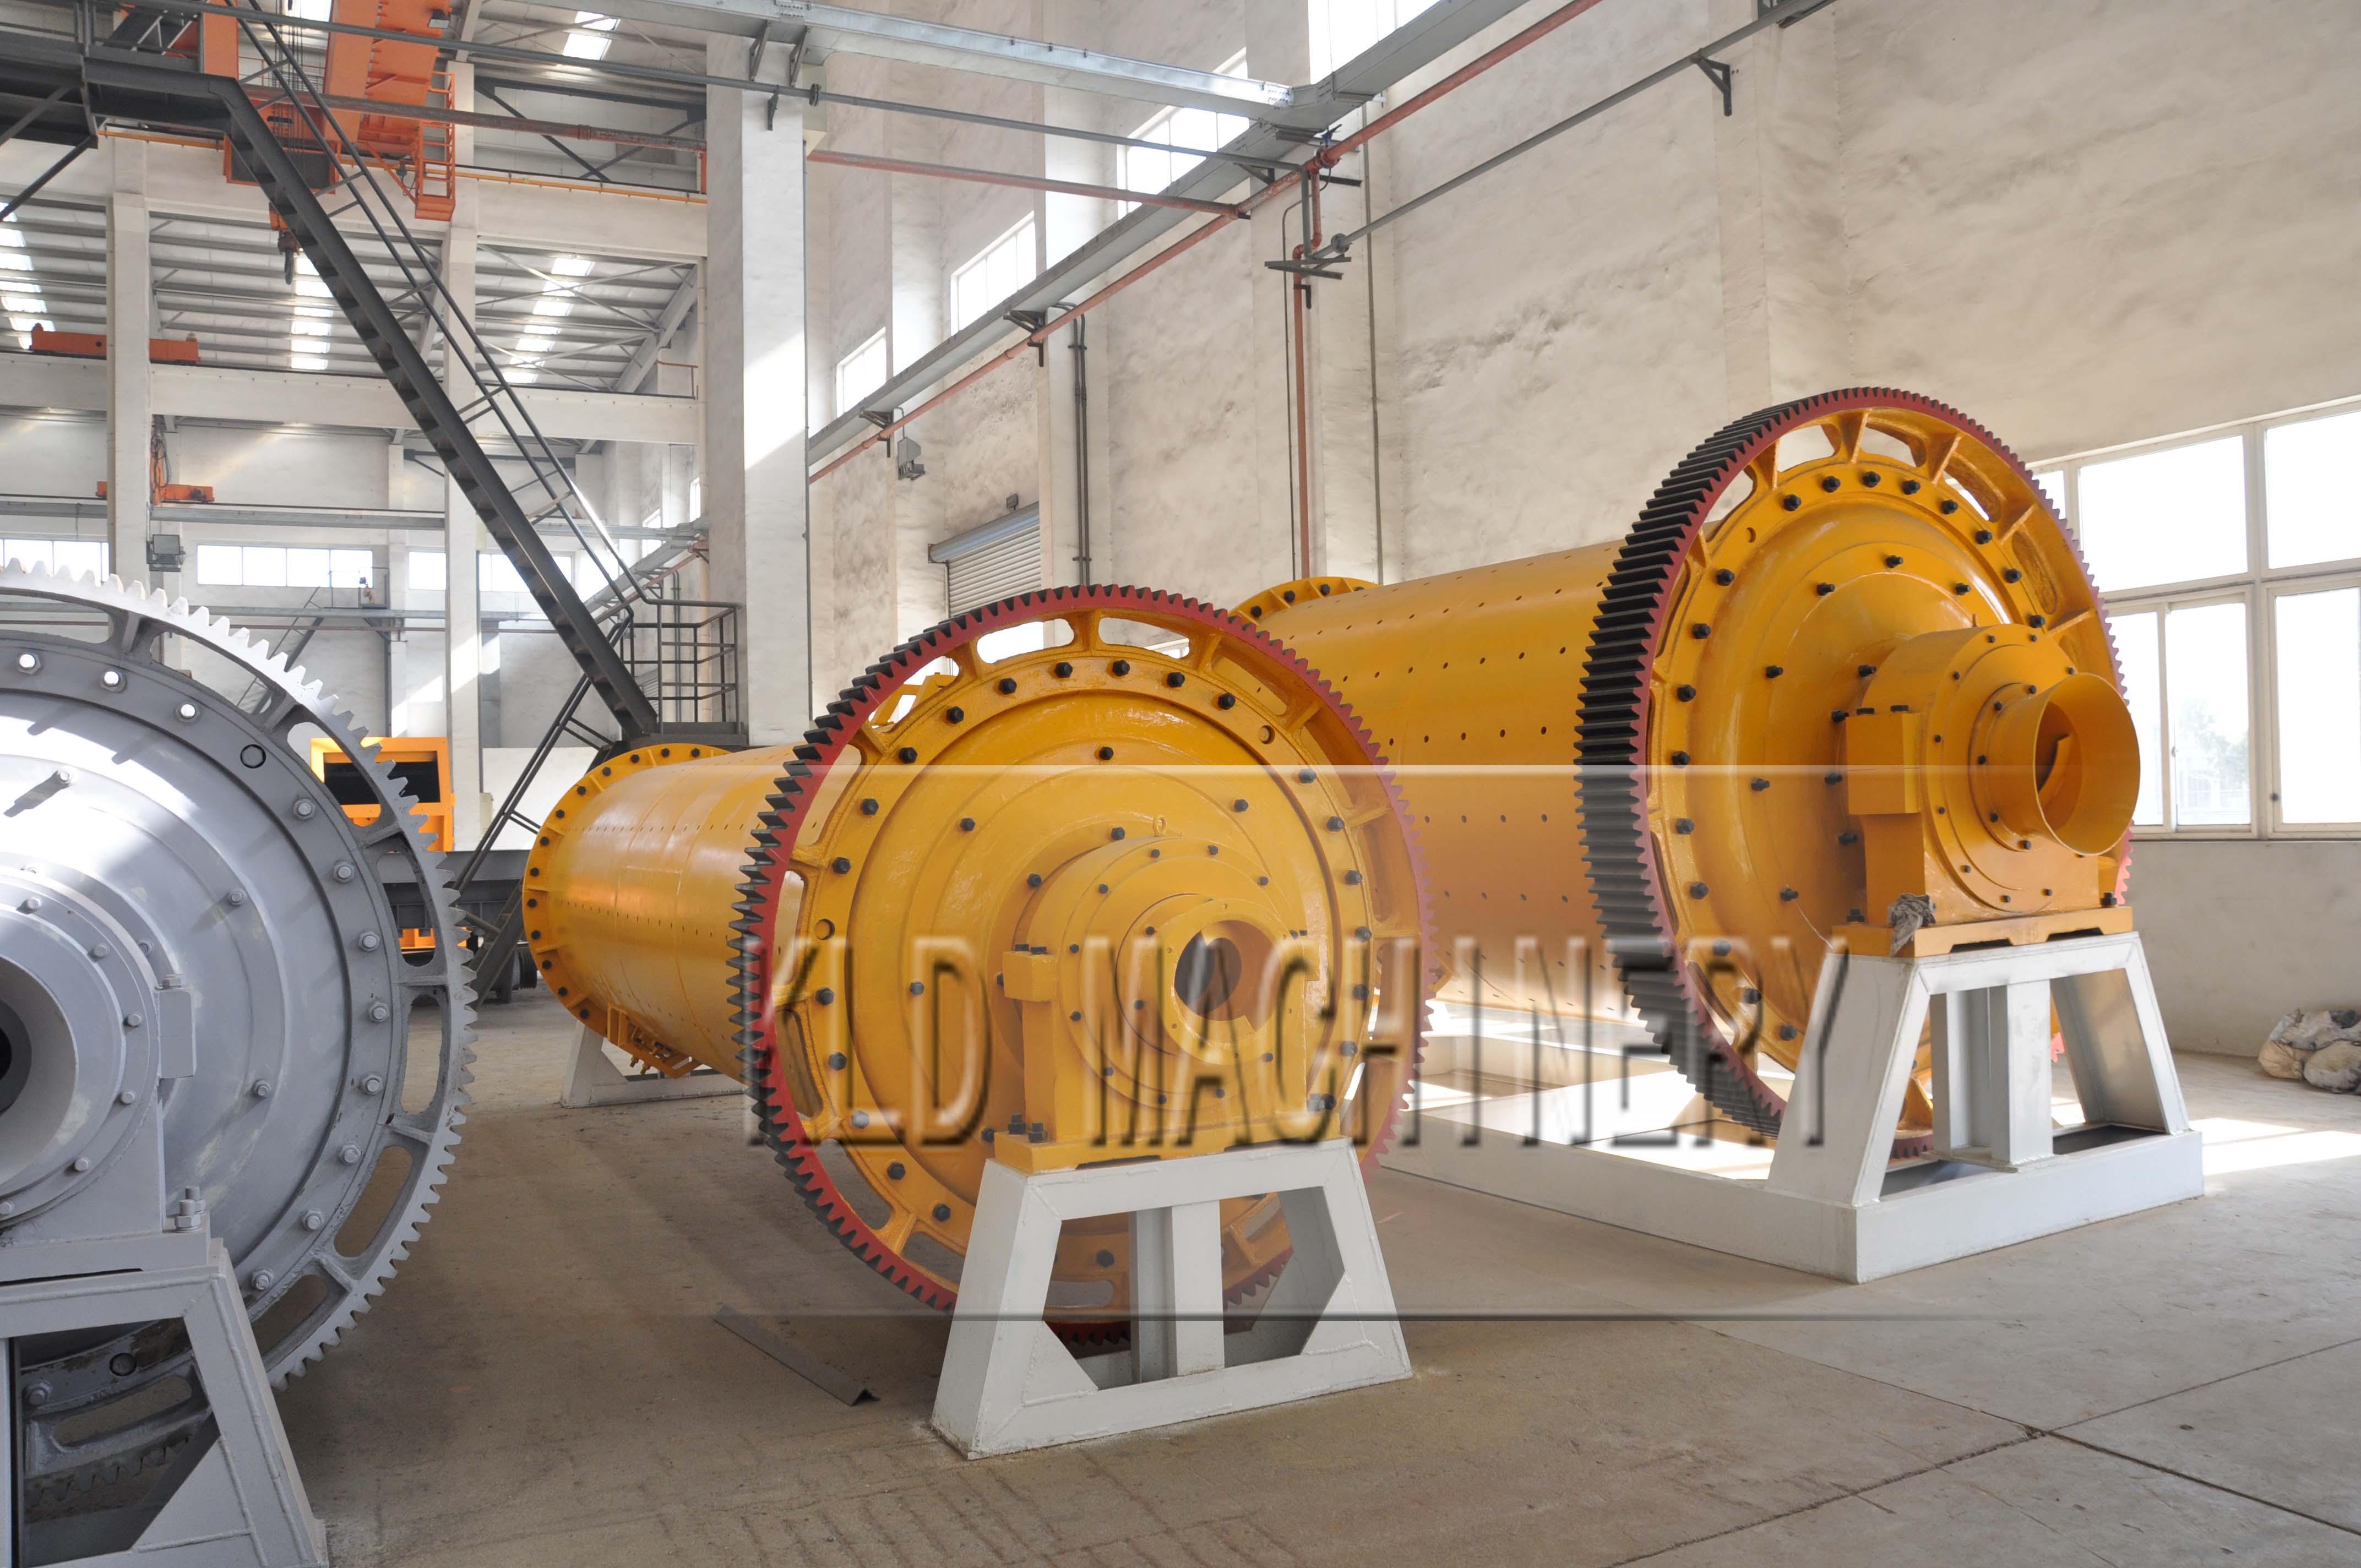  What are good ways to improve cement ball mill productivity?